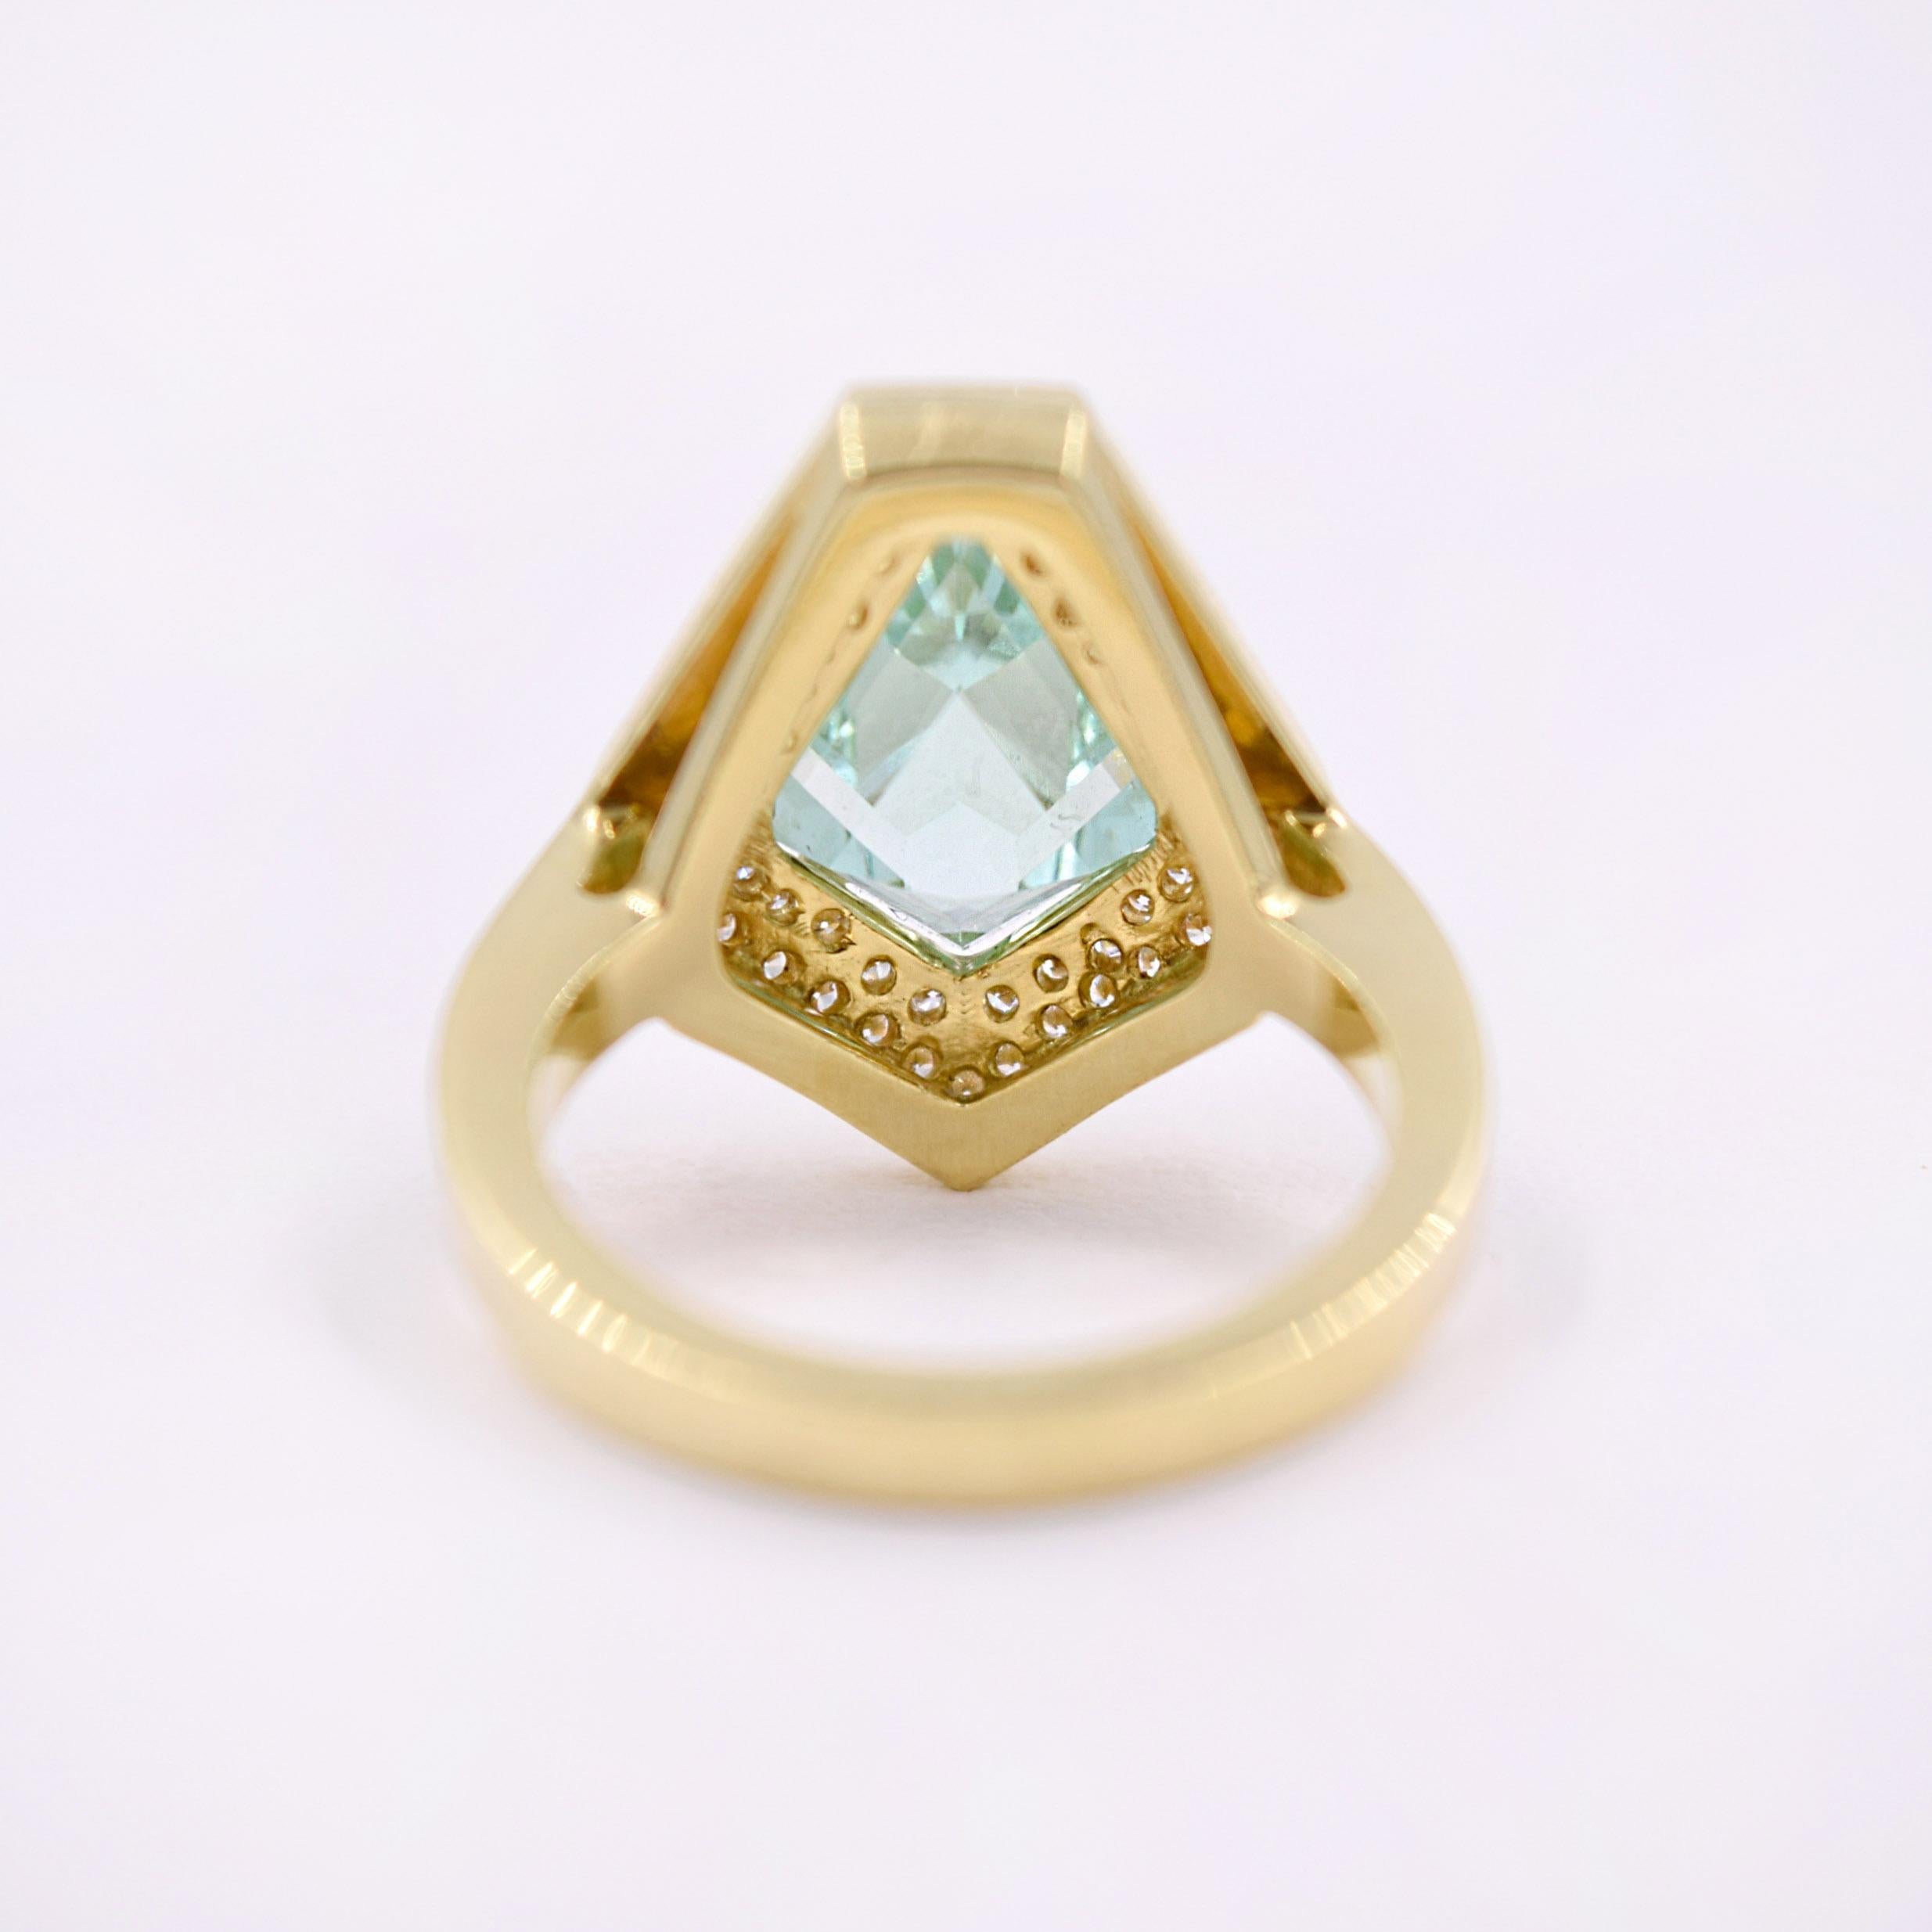 Lauren K. 2.27ct Kite Shaped Mint Tourmaline and Diamond Cocktail Ring 18K Gold For Sale 1